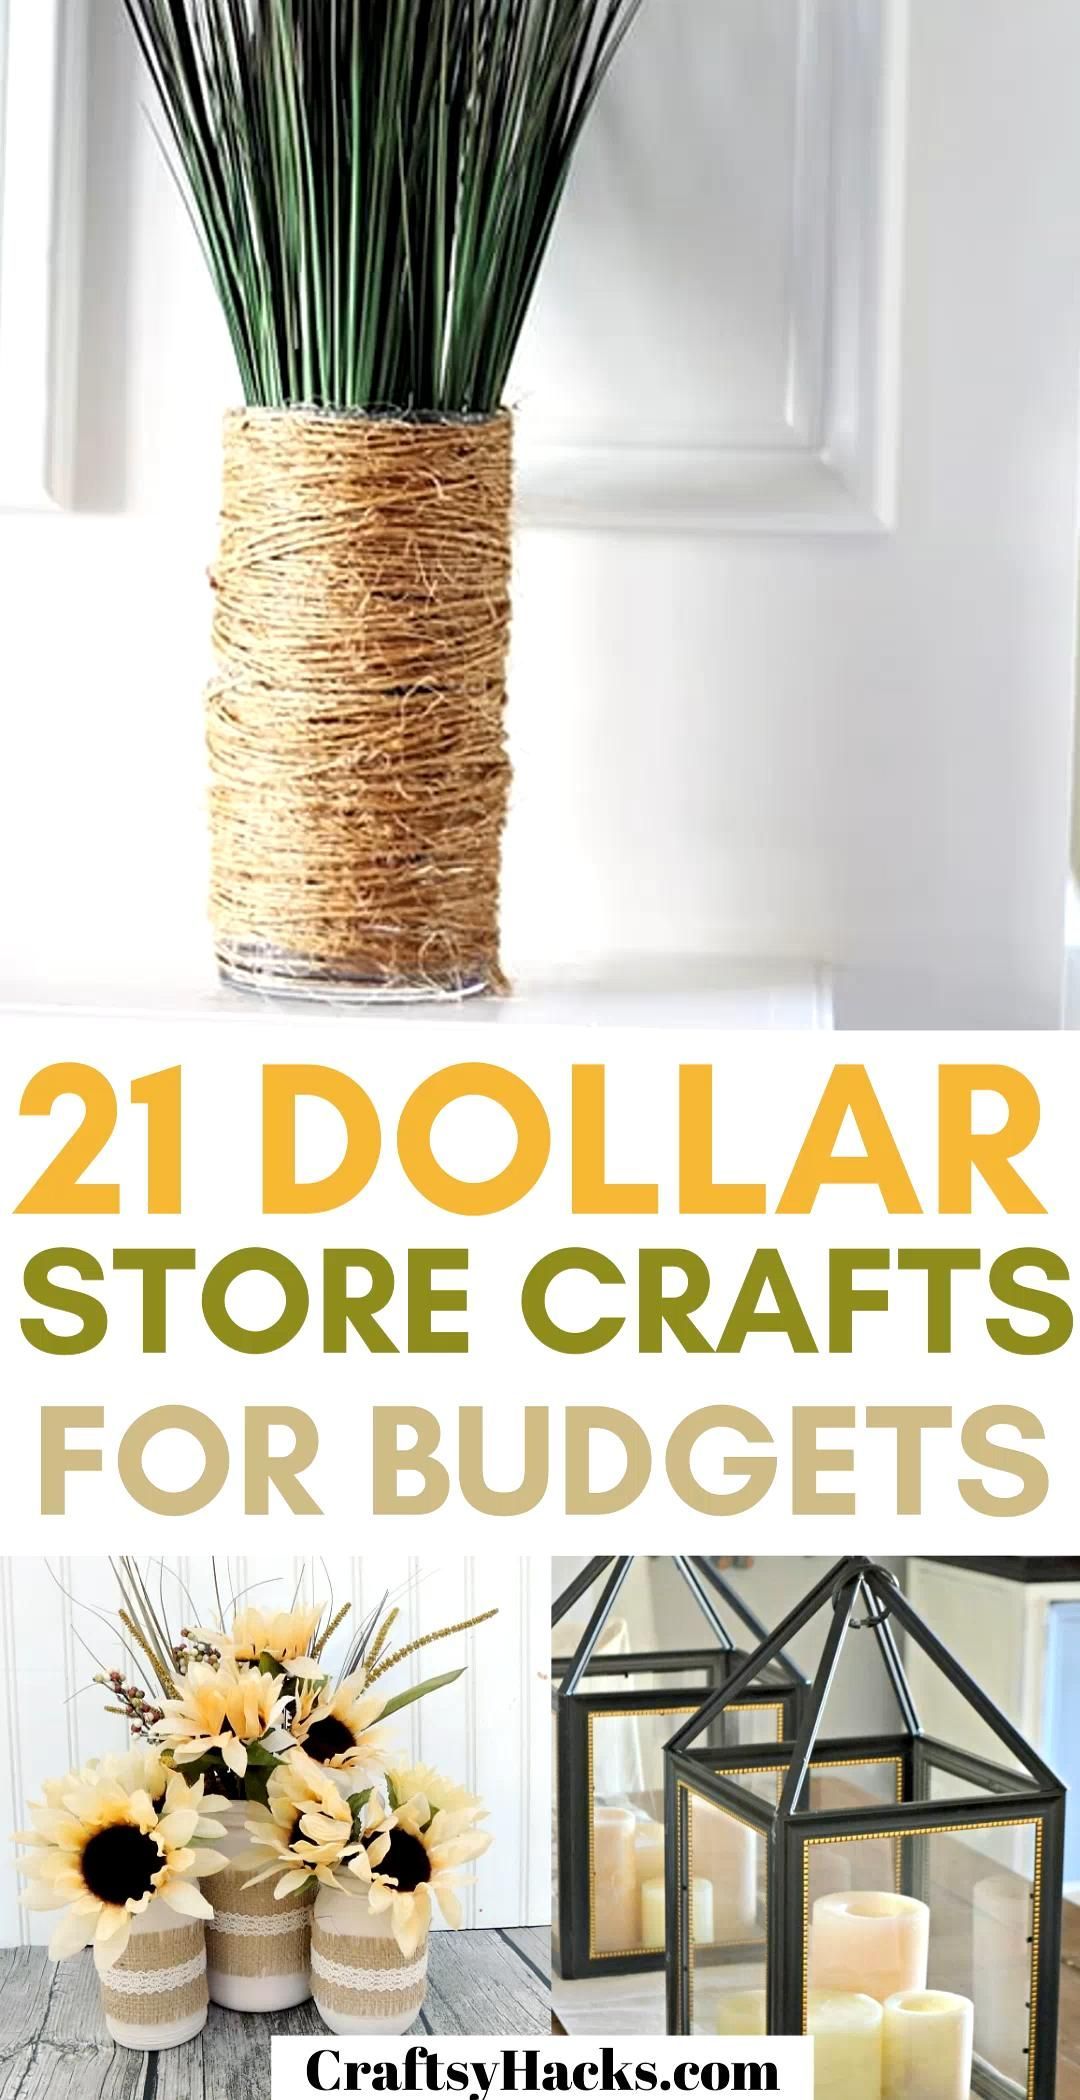 21 Dollar Store Crafts for Budgets -   20 diy projects to sell ideas